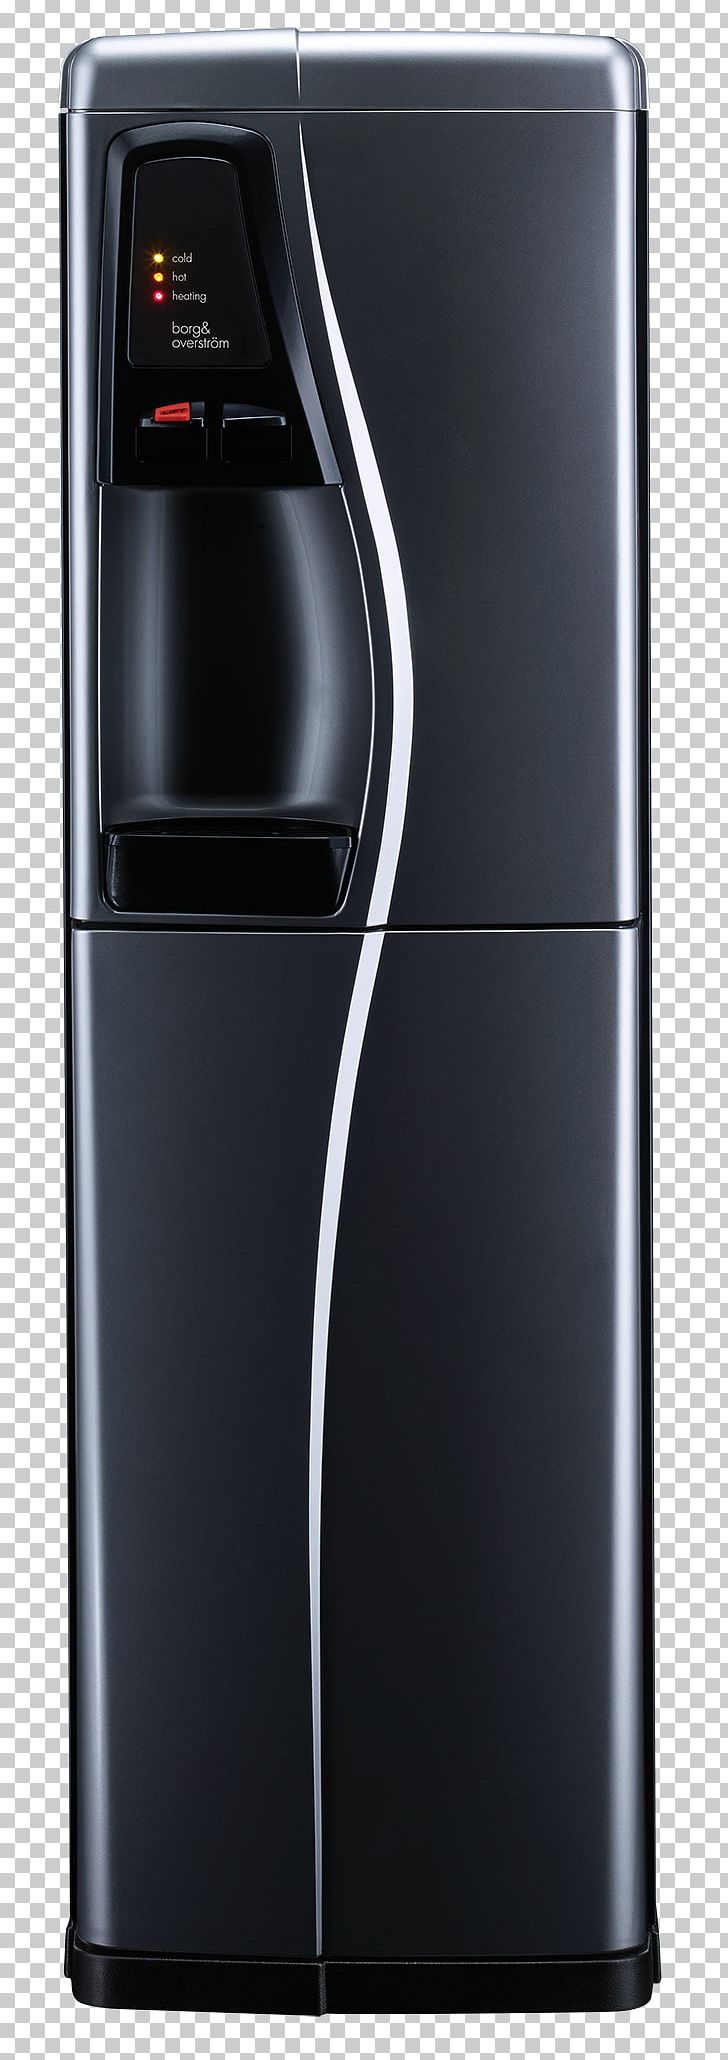 Water Cooler Water Filter Home Appliance Filtration PNG, Clipart, Computer Appliance, Cool, Filtration, Home, Home Appliance Free PNG Download